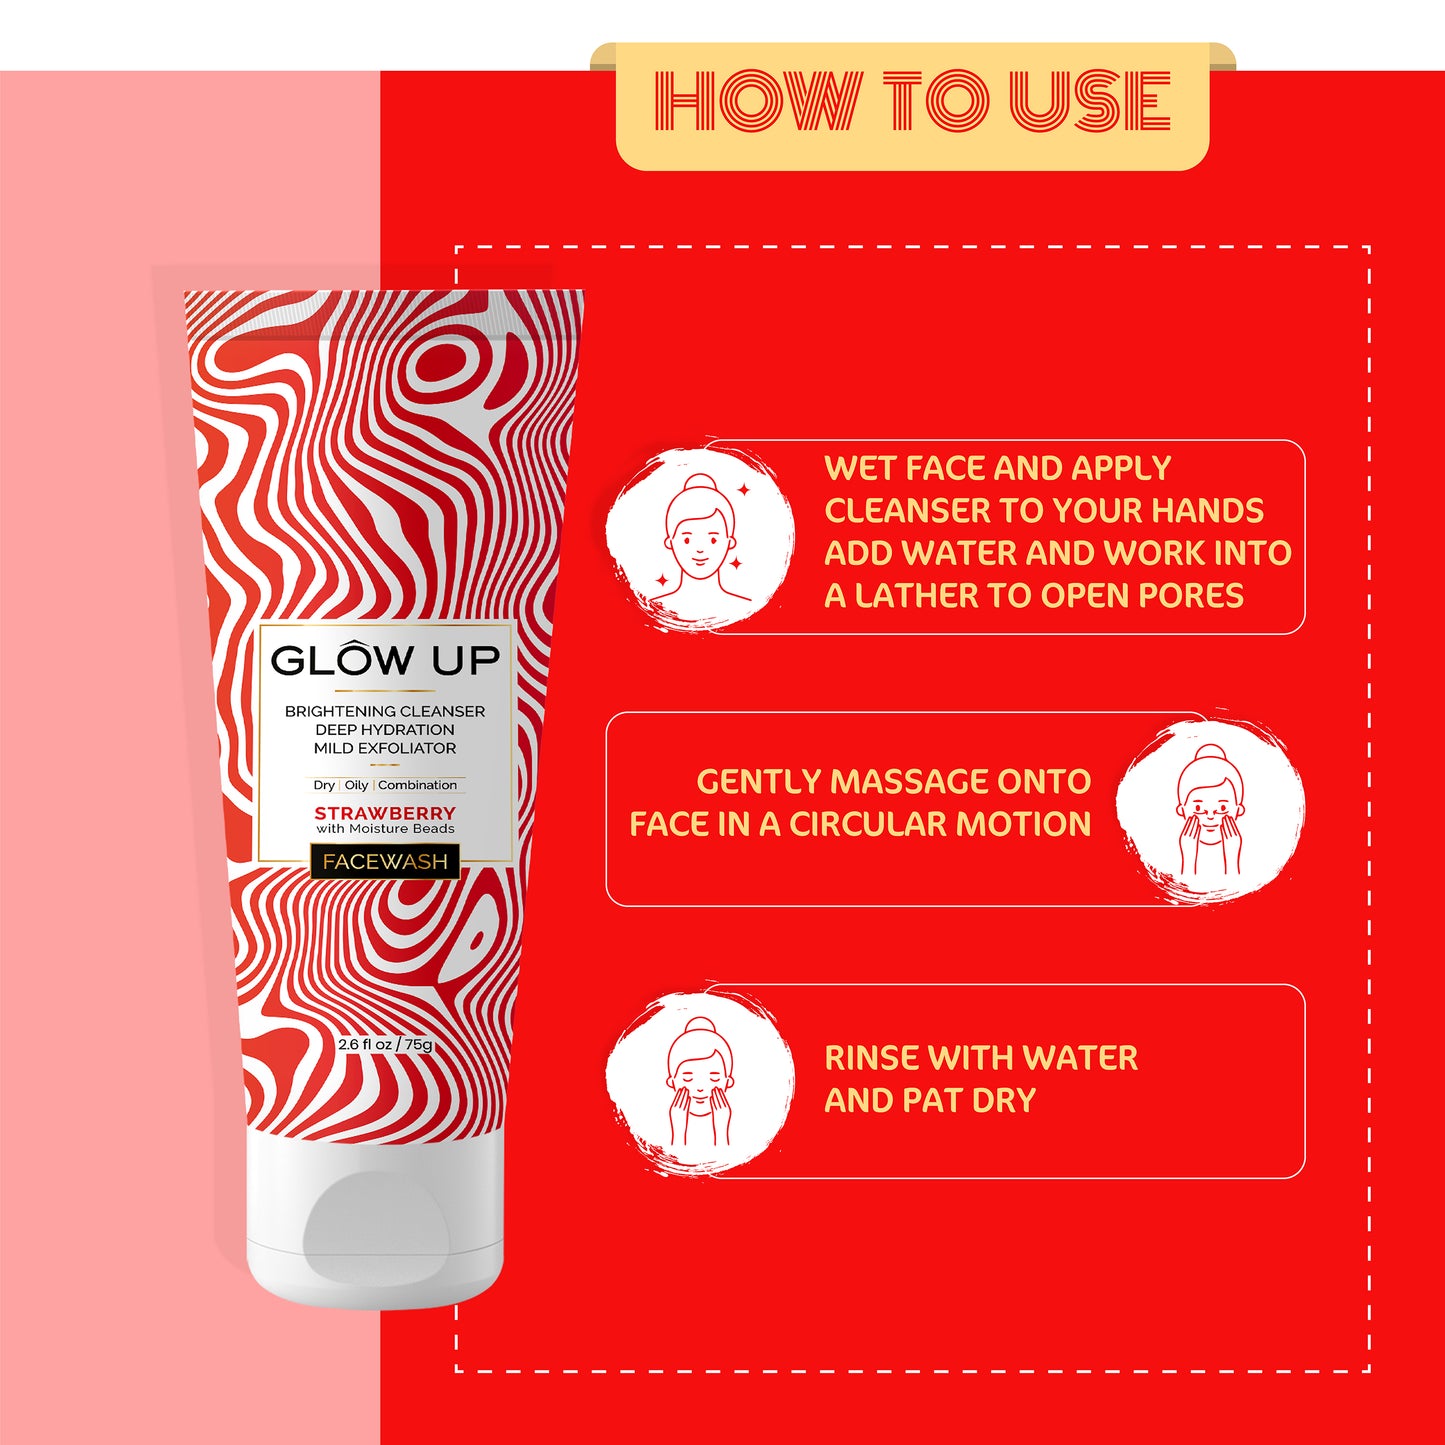 How to use glow up strawberry face wash